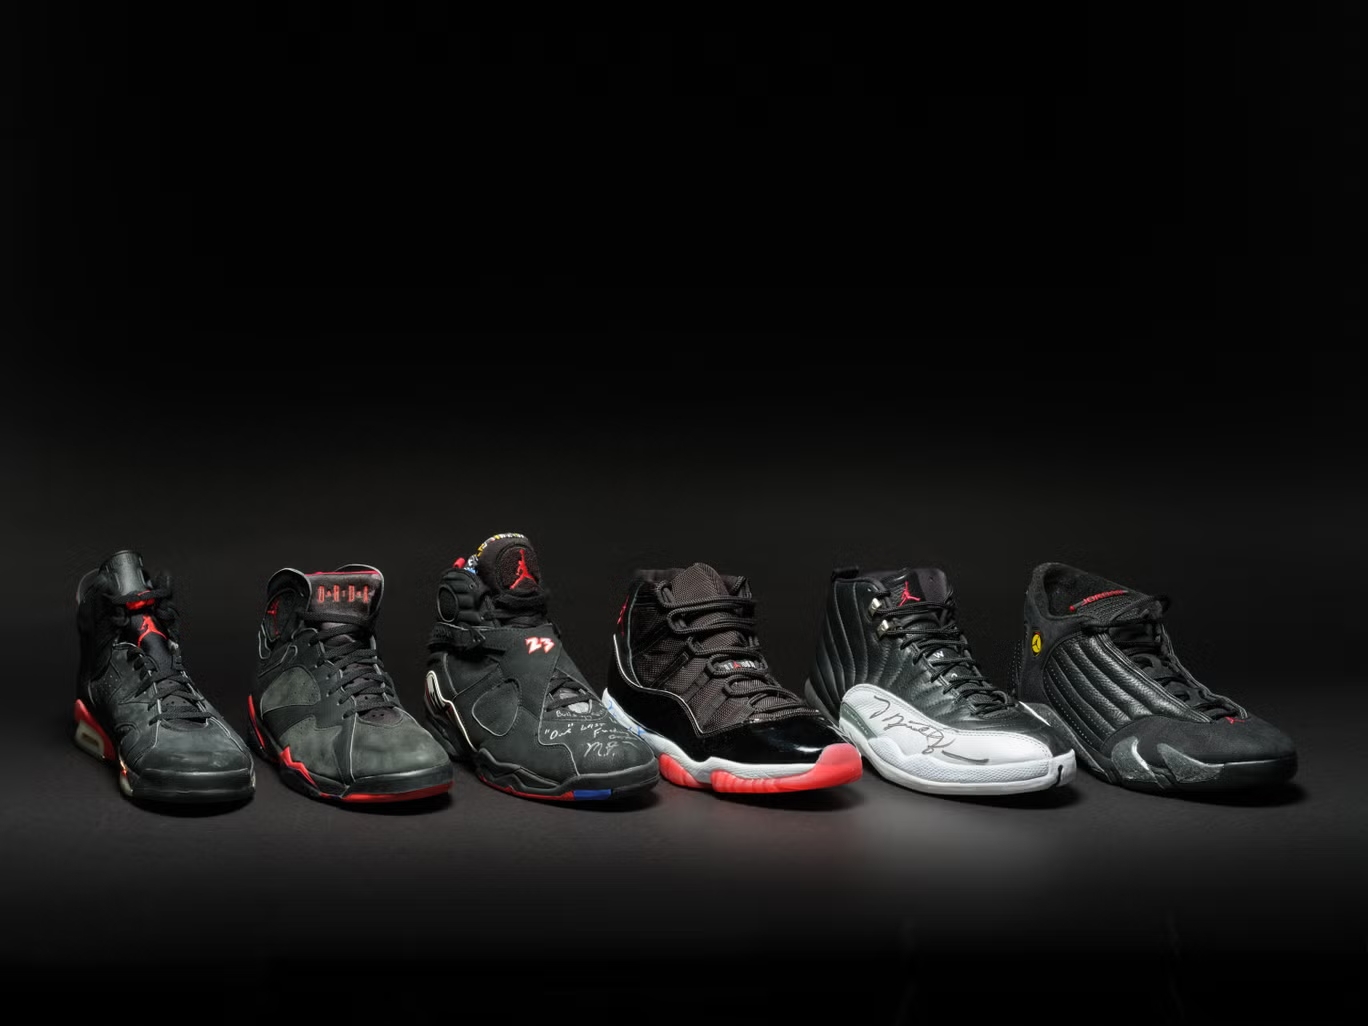 The Dynasty Collection of Michael Jordan's game-worn shoes.